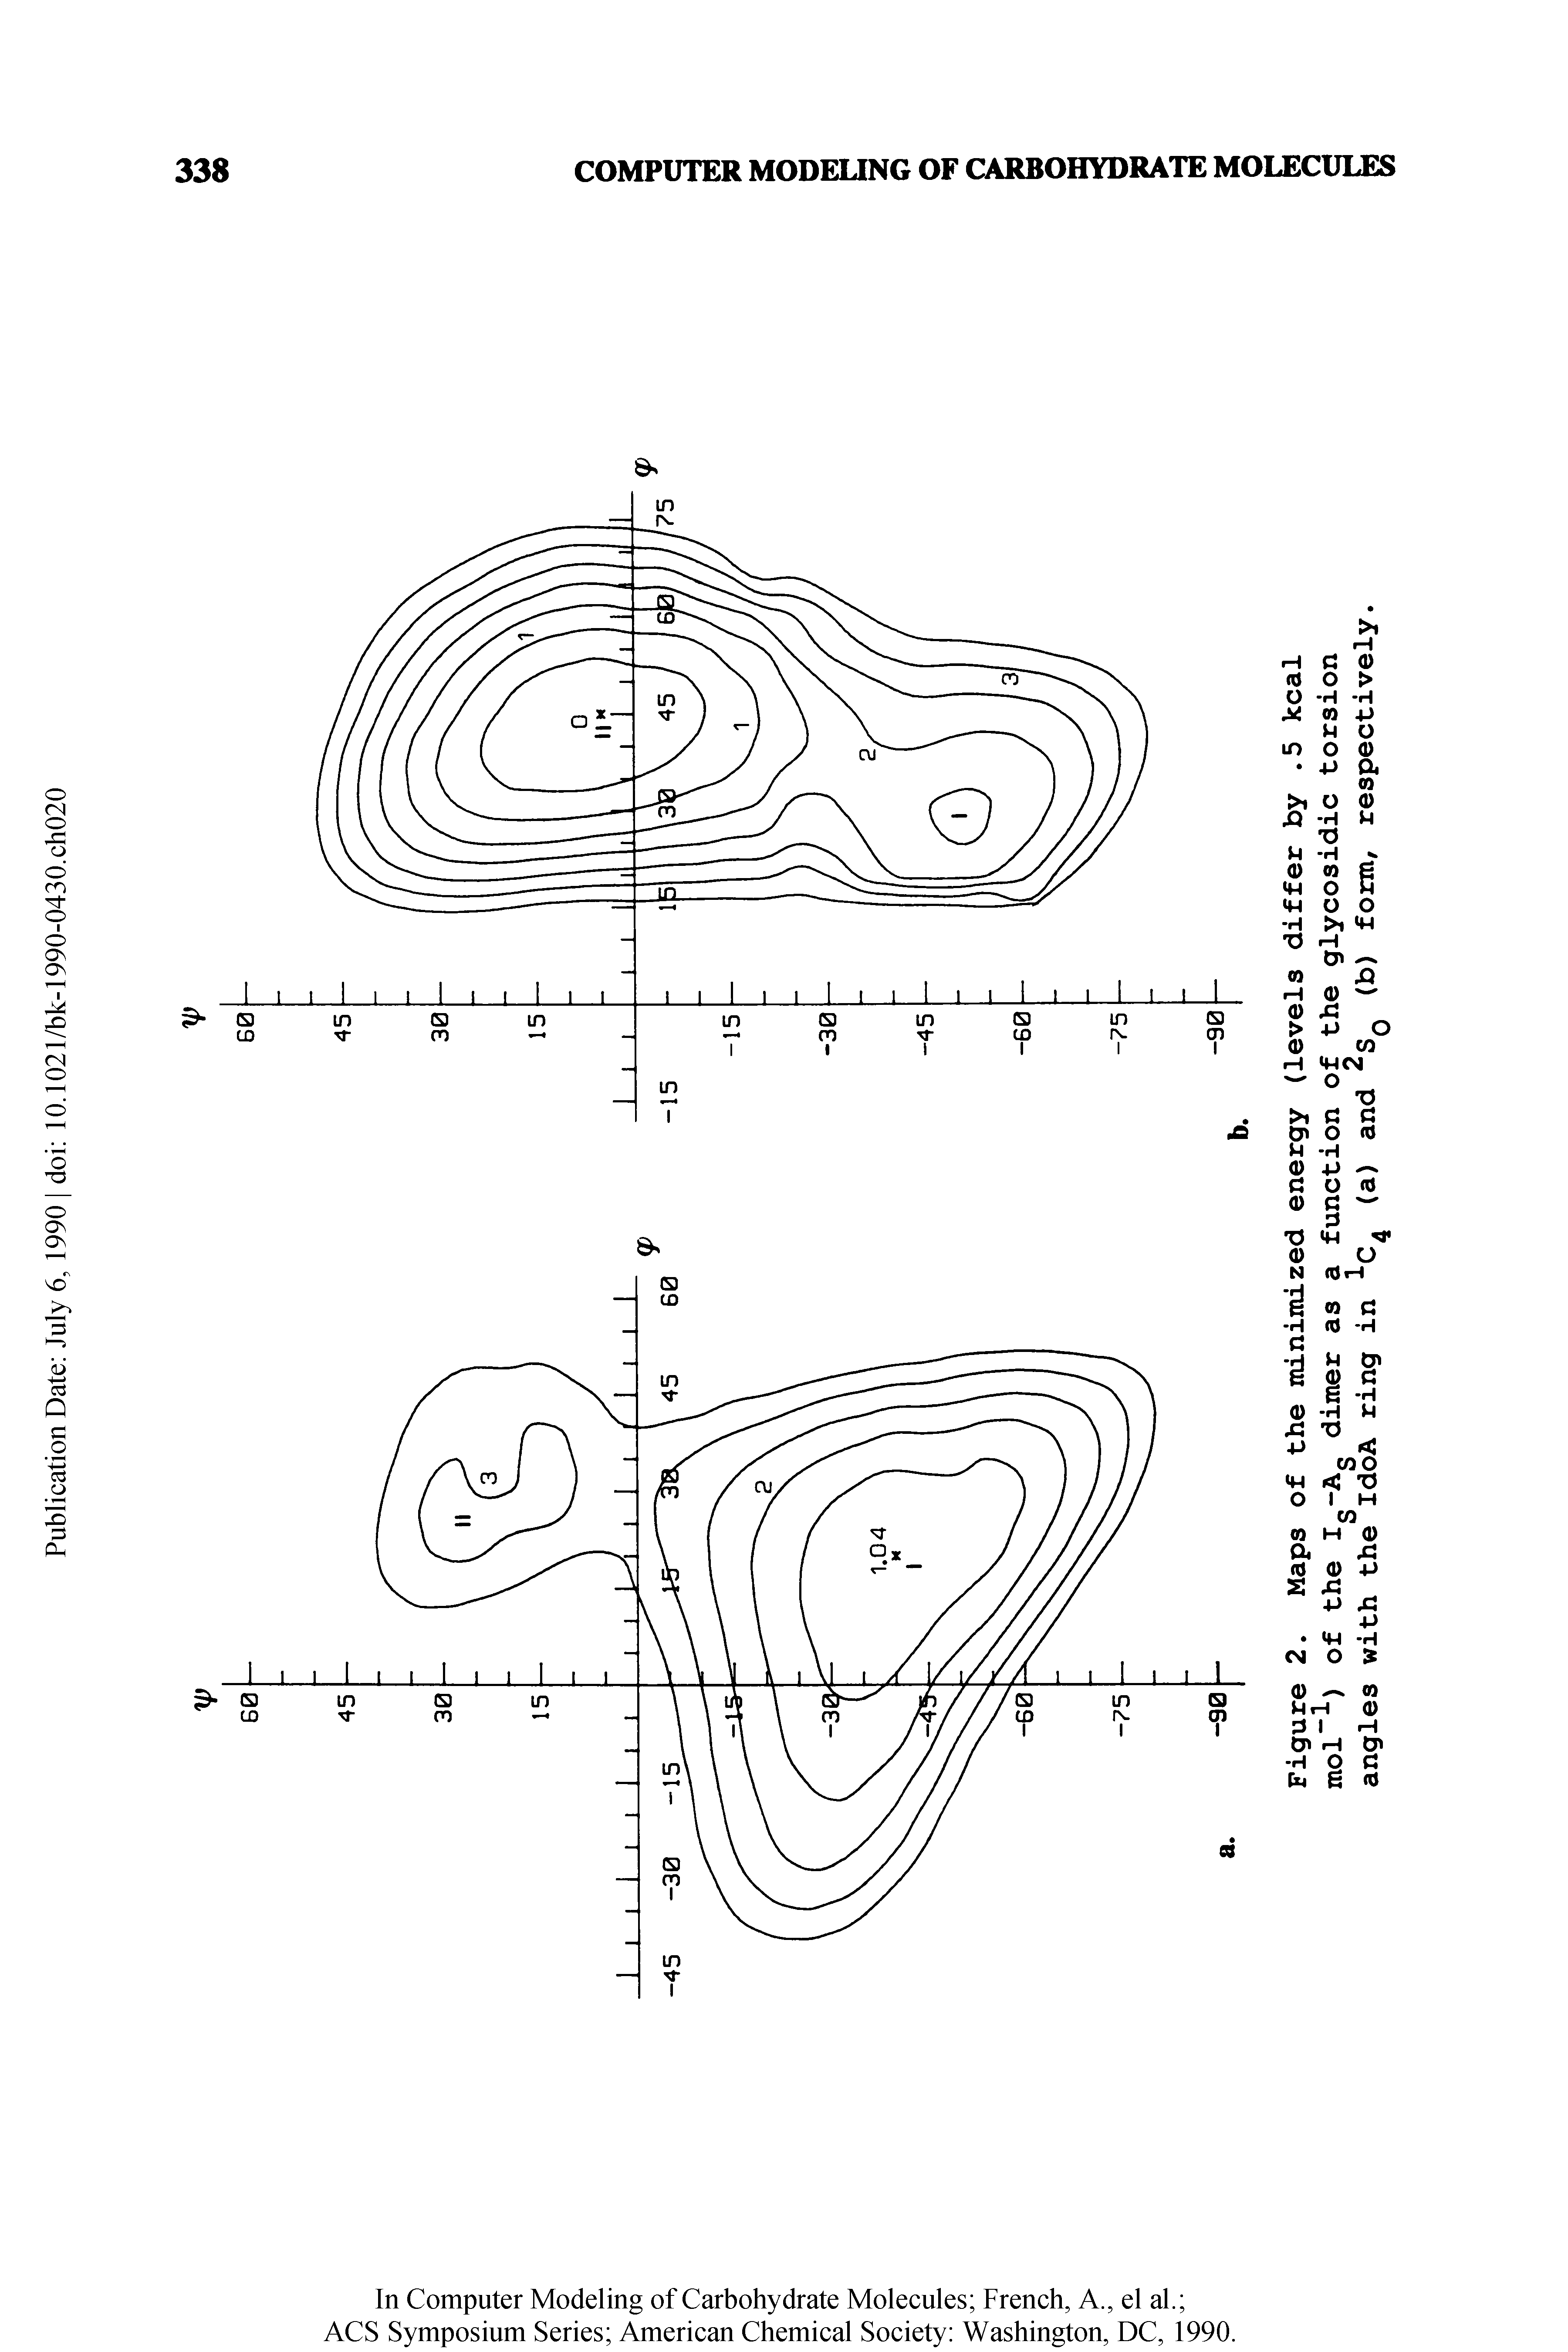 Figure 2. Maps of the minimized energy (levels differ by. 5 kcal mol ) of the Ig Ag dimer as a function of the glycosidic torsion angles with the IdoA ring in (a) and (b) form, respectively.